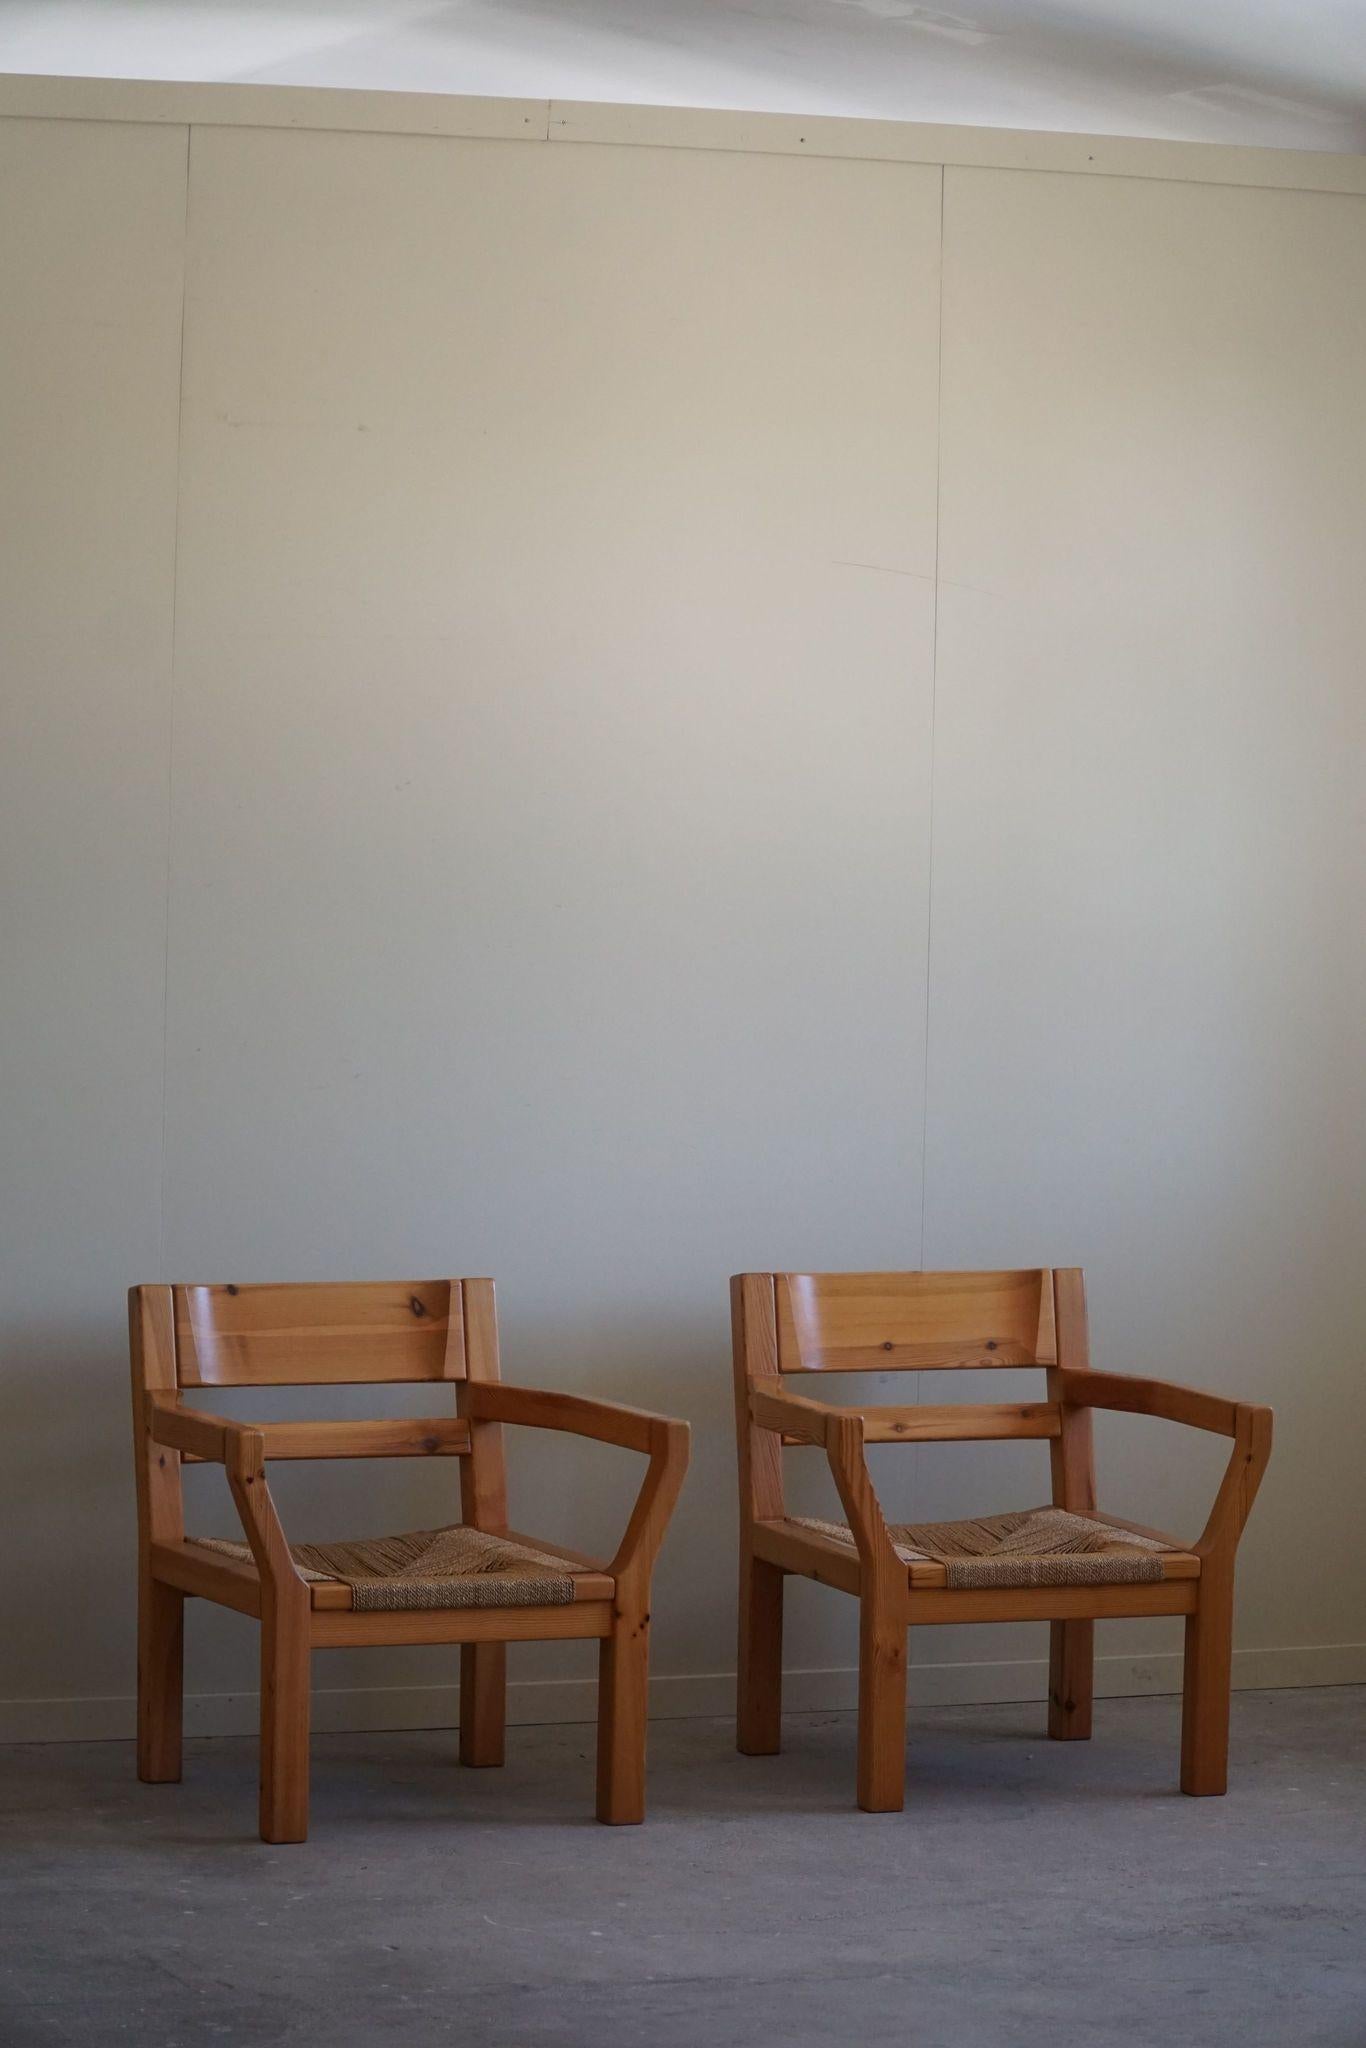 Tage Poulsen, A Pair of Brutalist Chairs in Pine & Cord, Danish Modern, 1970s In Good Condition For Sale In Odense, DK